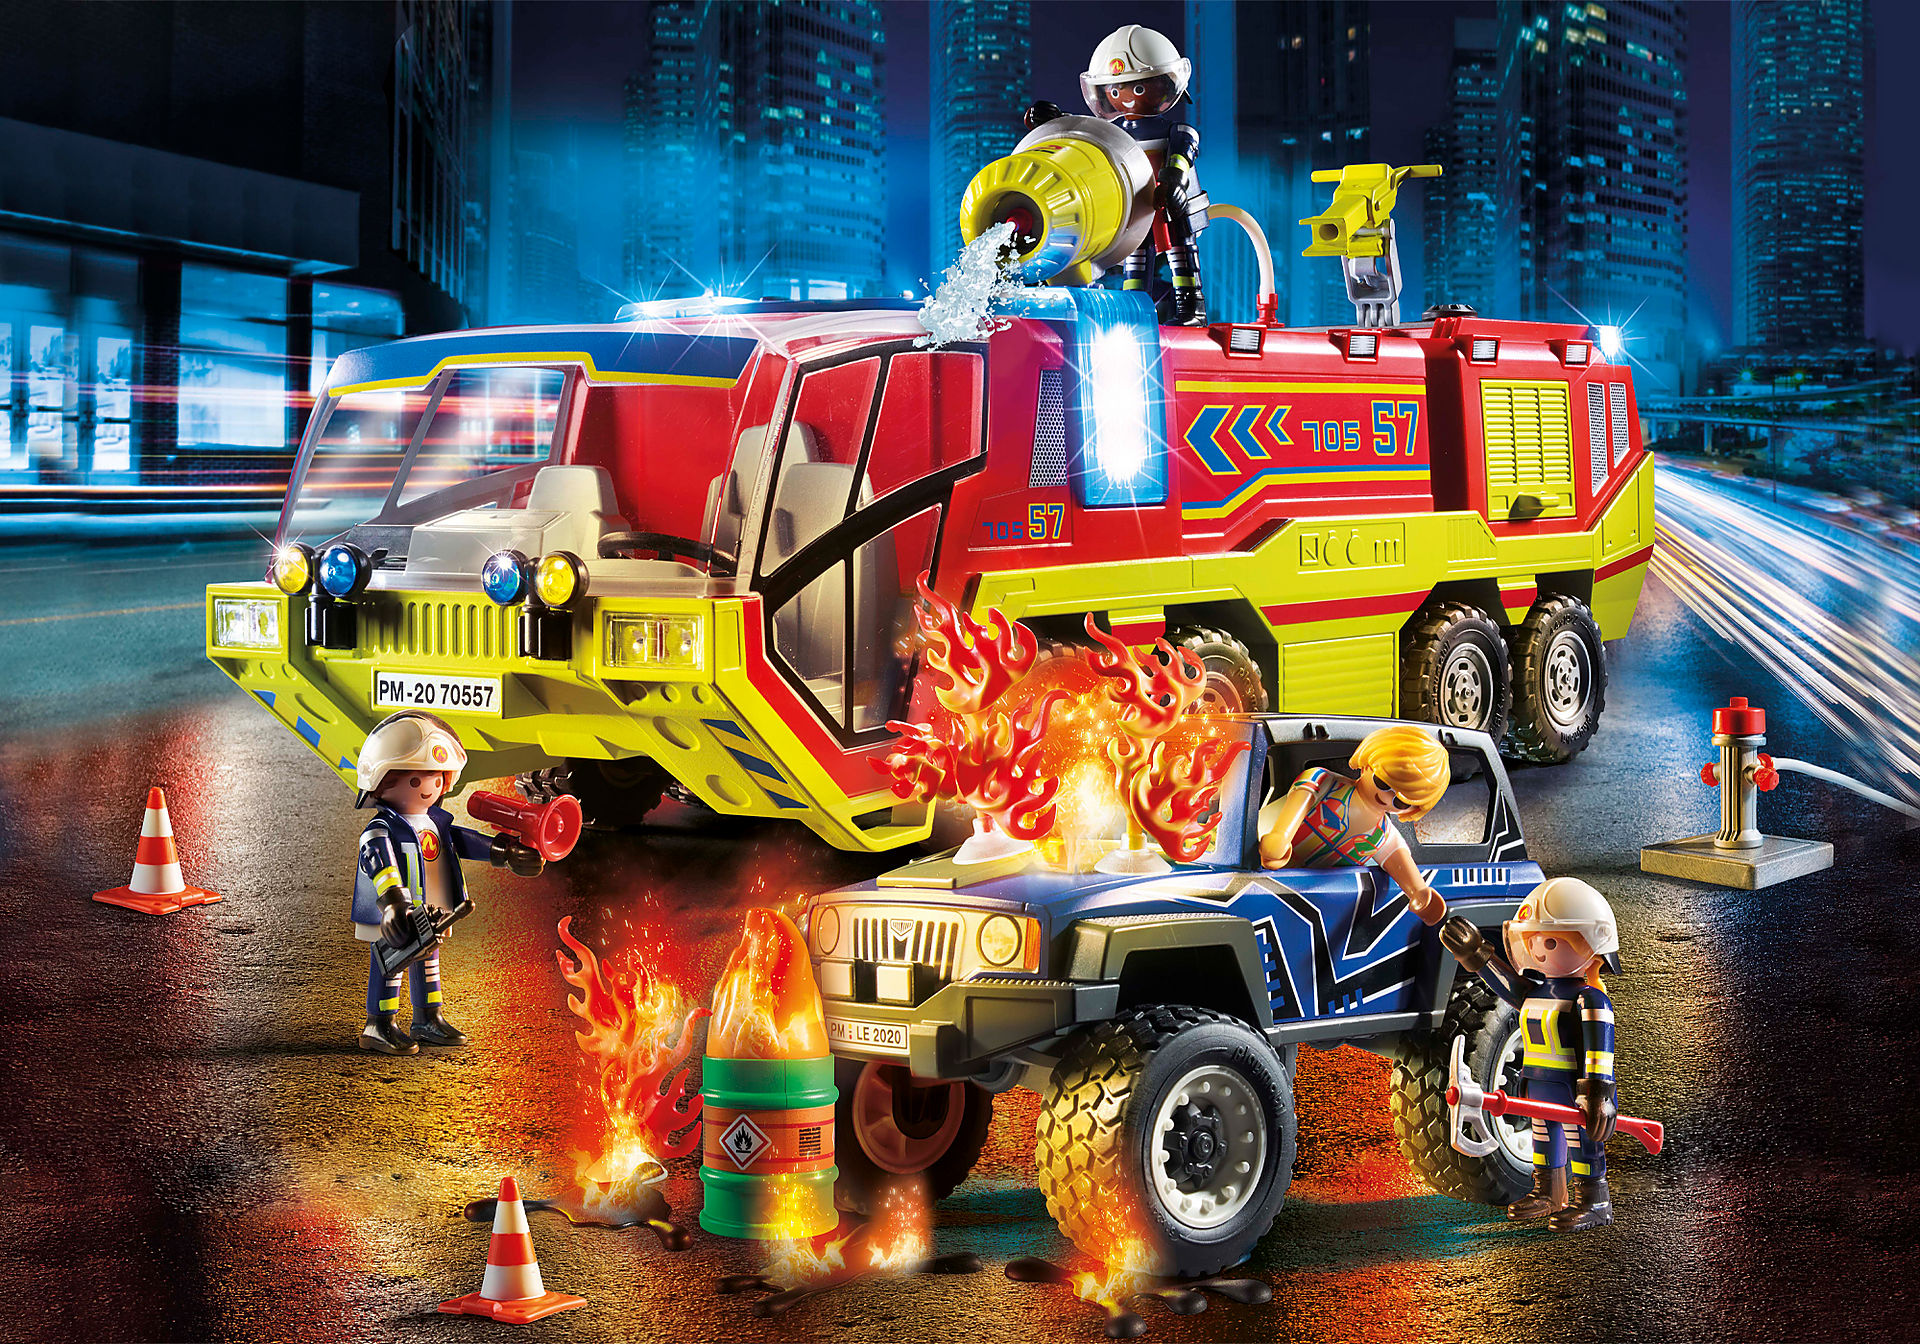 70557 Fire Engine with Truck zoom image1